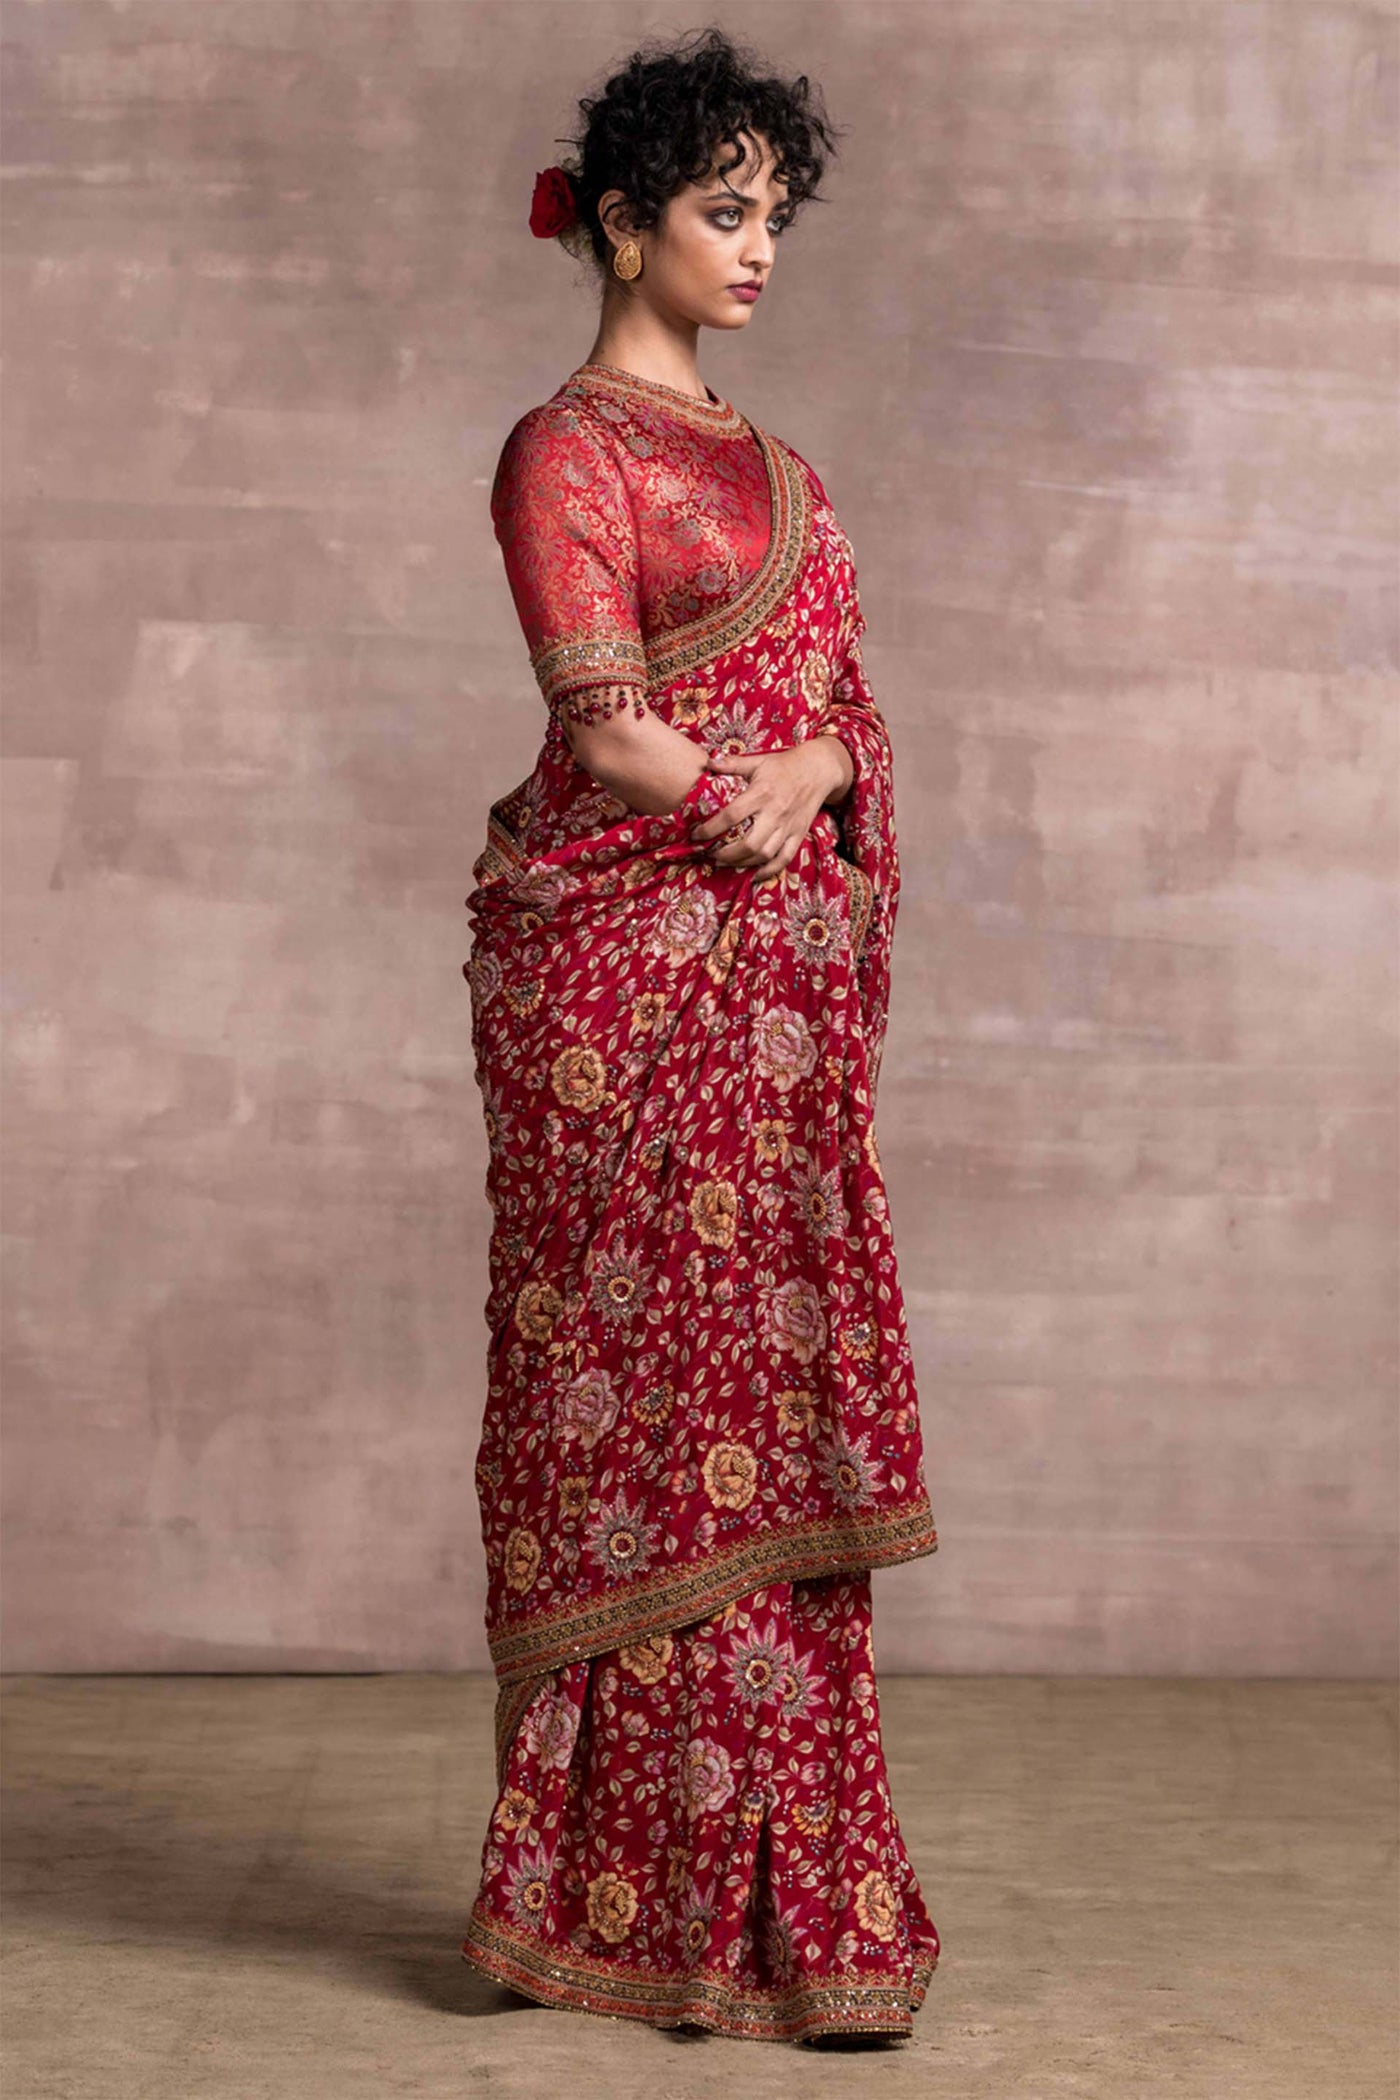 Tarun Tahiliani Printed Saree In Silk-Crepe Fabric With Hand Embroidered Brocade Blouse red festive indian designer wear online shopping melange singapore wedding bridal